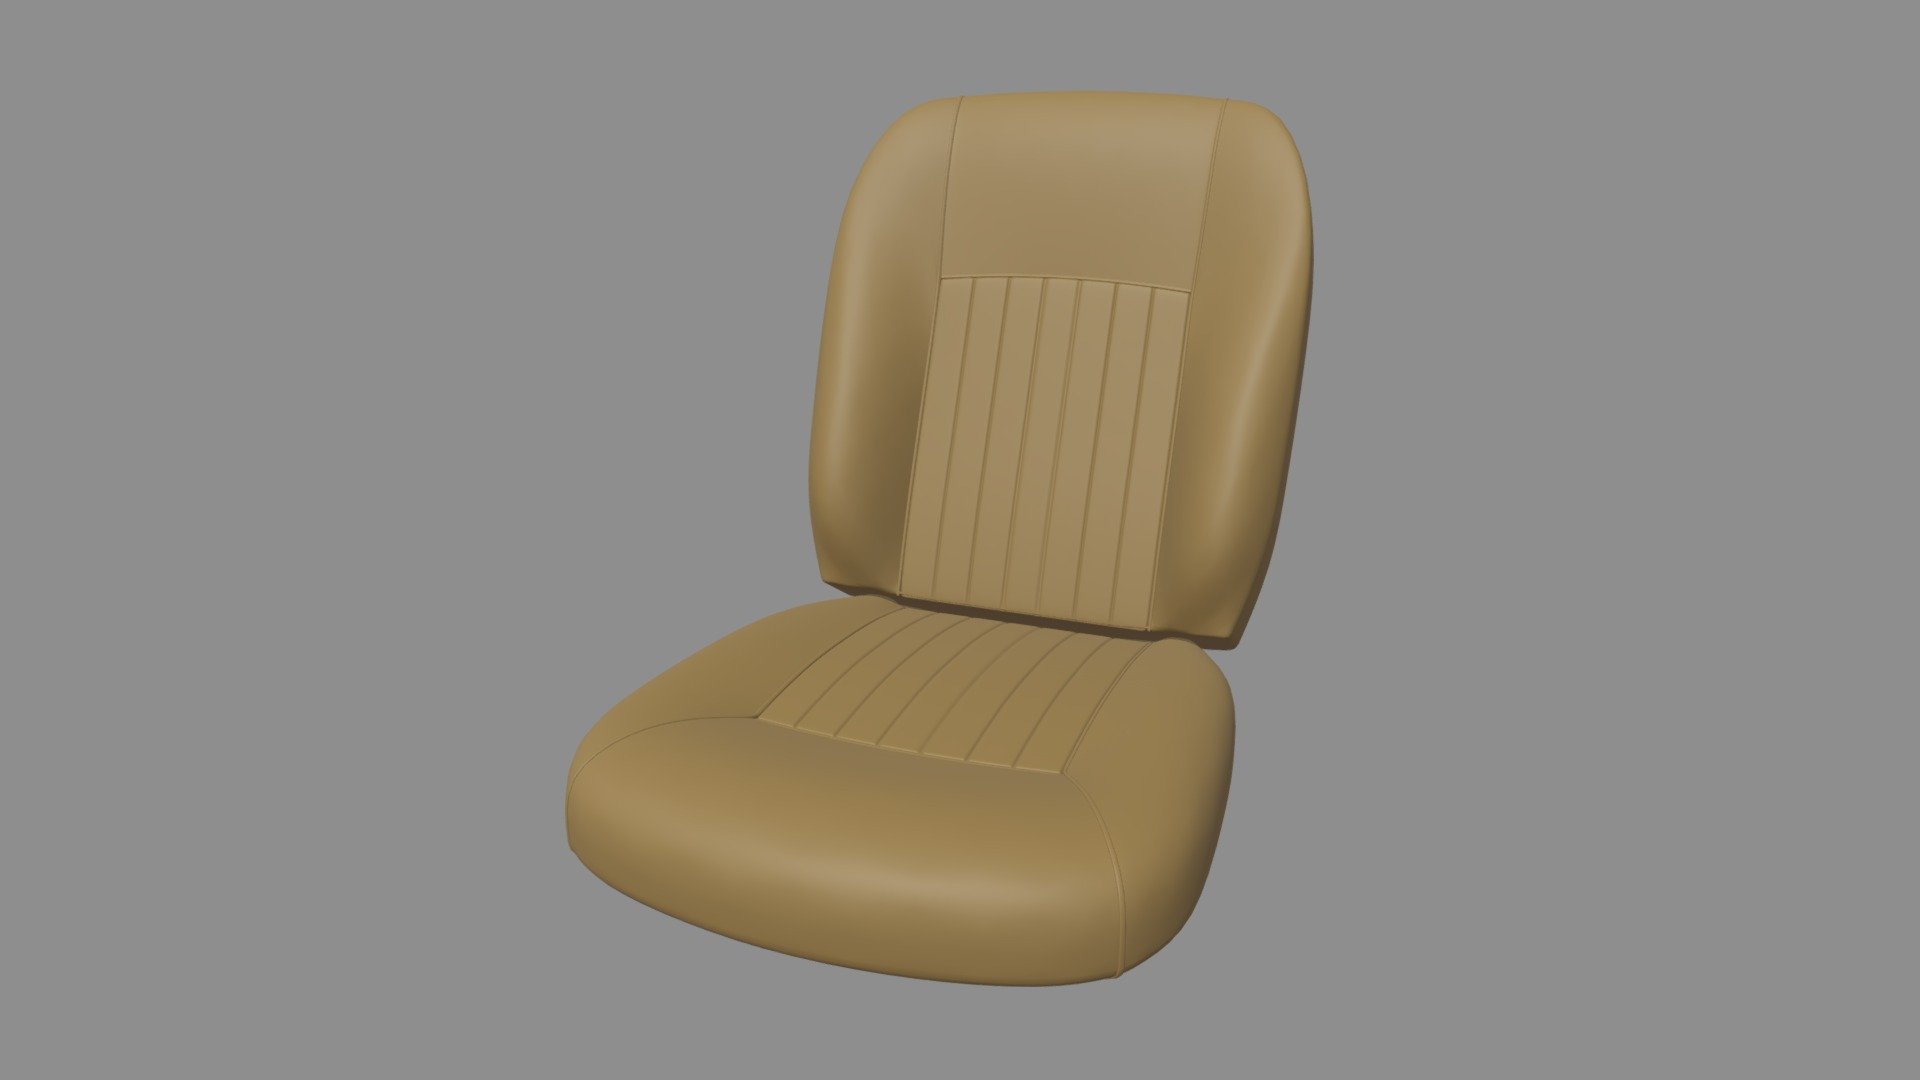 This model contains a car seat based on a real stylized car seat from a classic car which i modeled in Maya 2018. This model is perfect to create a new great scene with different car pieces or part of a car model. I got a lot of different Car Seats and Car Parts on my profile.

The model is ready as one unique part and ready for being a great CGI model and also a 3D printable model, i will add the STL model, tested for 3D printing in Ultimaker Cura. I uploaded the model in .mb, ,blend, .stl, .obj and .fbx. If you need any other file tell me.

If you need any kind of help contact me, i will help you with everything i can. If you like the model please give me some feedback, I would appreciate it.

Don't doubt on contacting me, i would be very happy to help. If you experience any kind of difficulties, be sure to contact me and i will help you. Sincerely Yours, ViperJr3D - Car Seat 010 - Buy Royalty Free 3D model by ViperJr3D 3d model